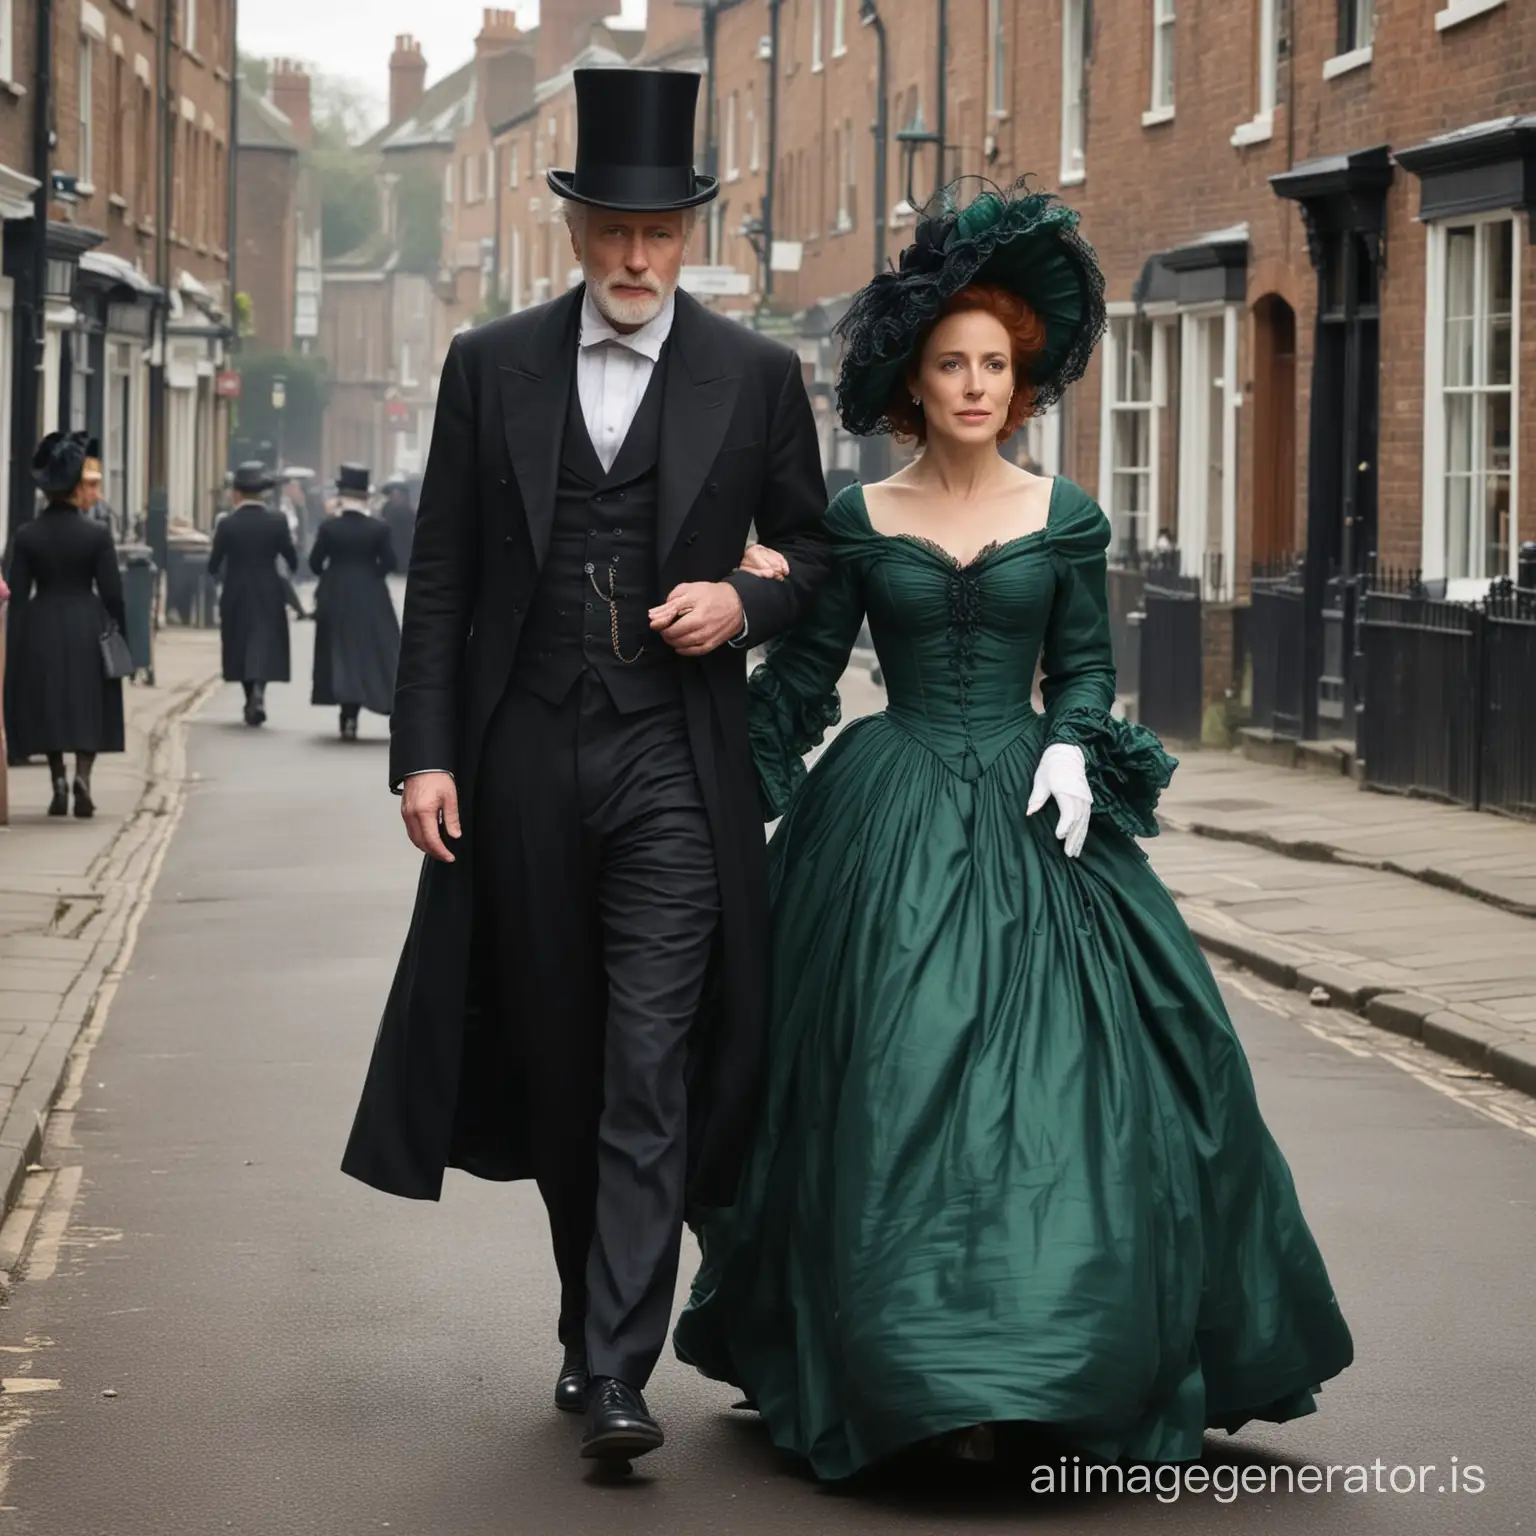 red hair Gillian Anderson wearing a dark emerald floor-length loose billowing 1860 Victorian crinoline poofy dress her hair styled into a tight bun adorned with a frilly bonnet walking on a Victorian era street with an old man dressed into a black Victorian suit who seems to be her newlywed husband